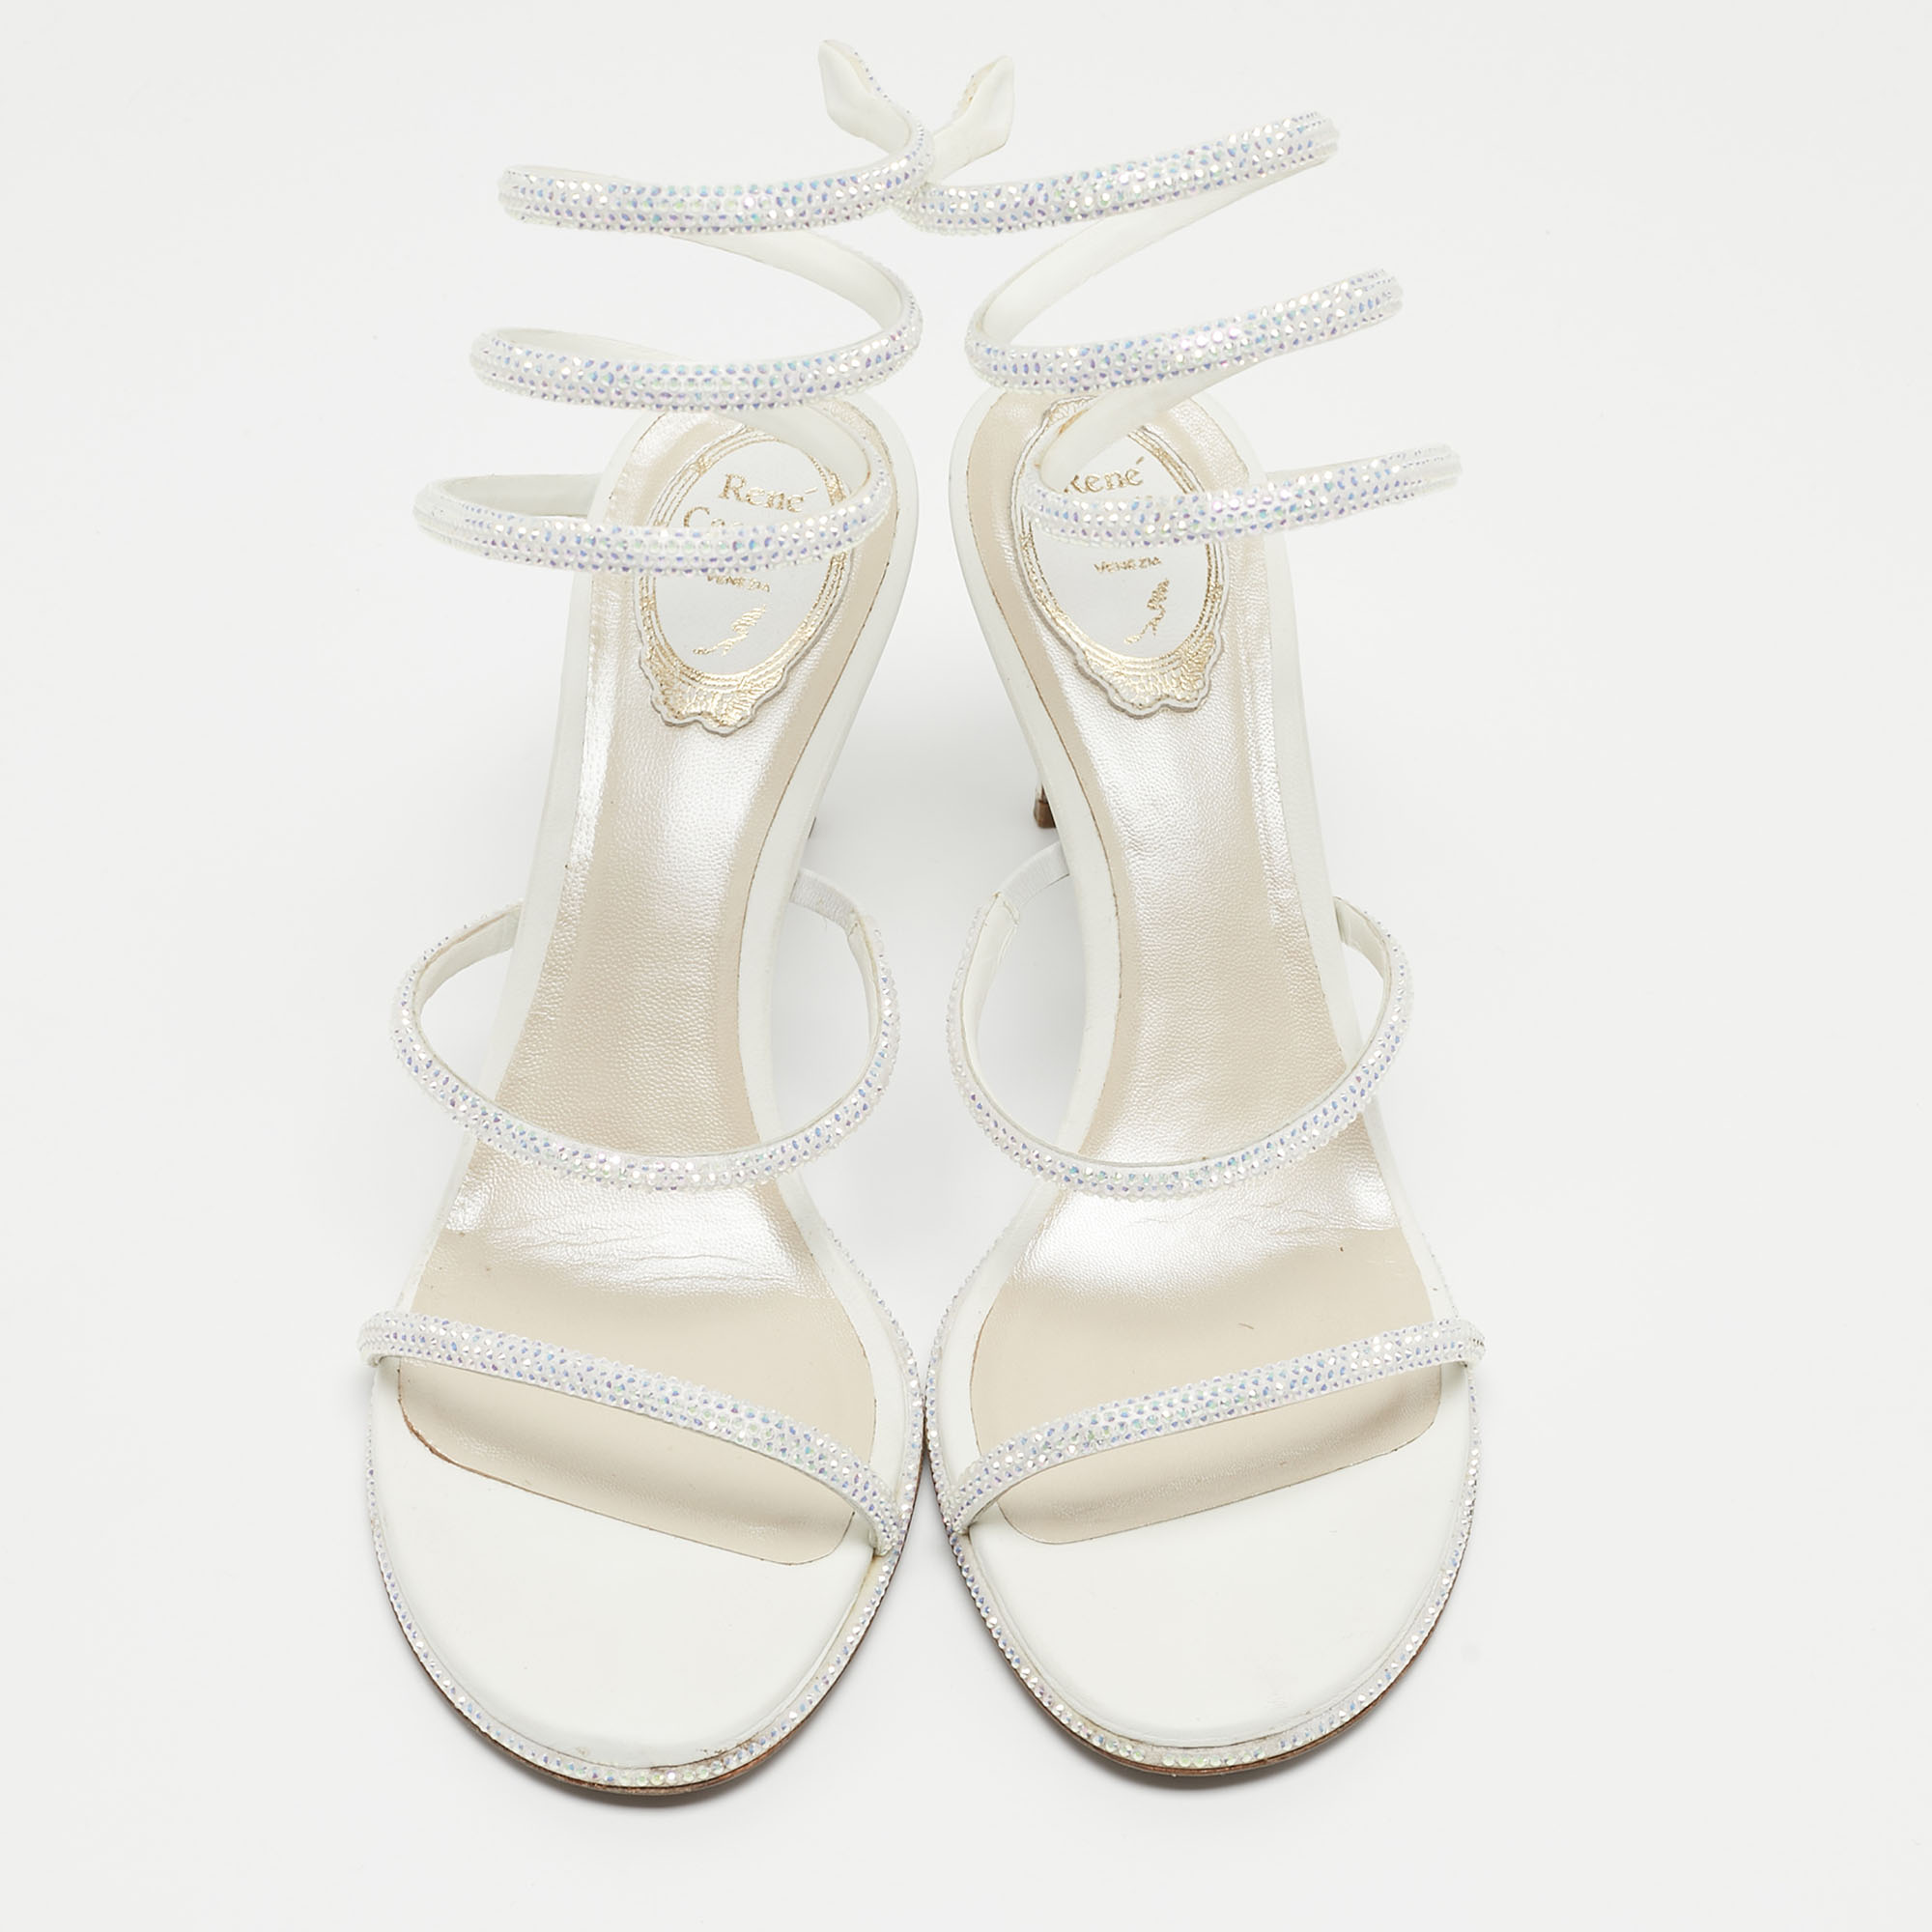 Rene Caovilla White Leather Crystal Embellished Ankle Wrap Sandals Size 41